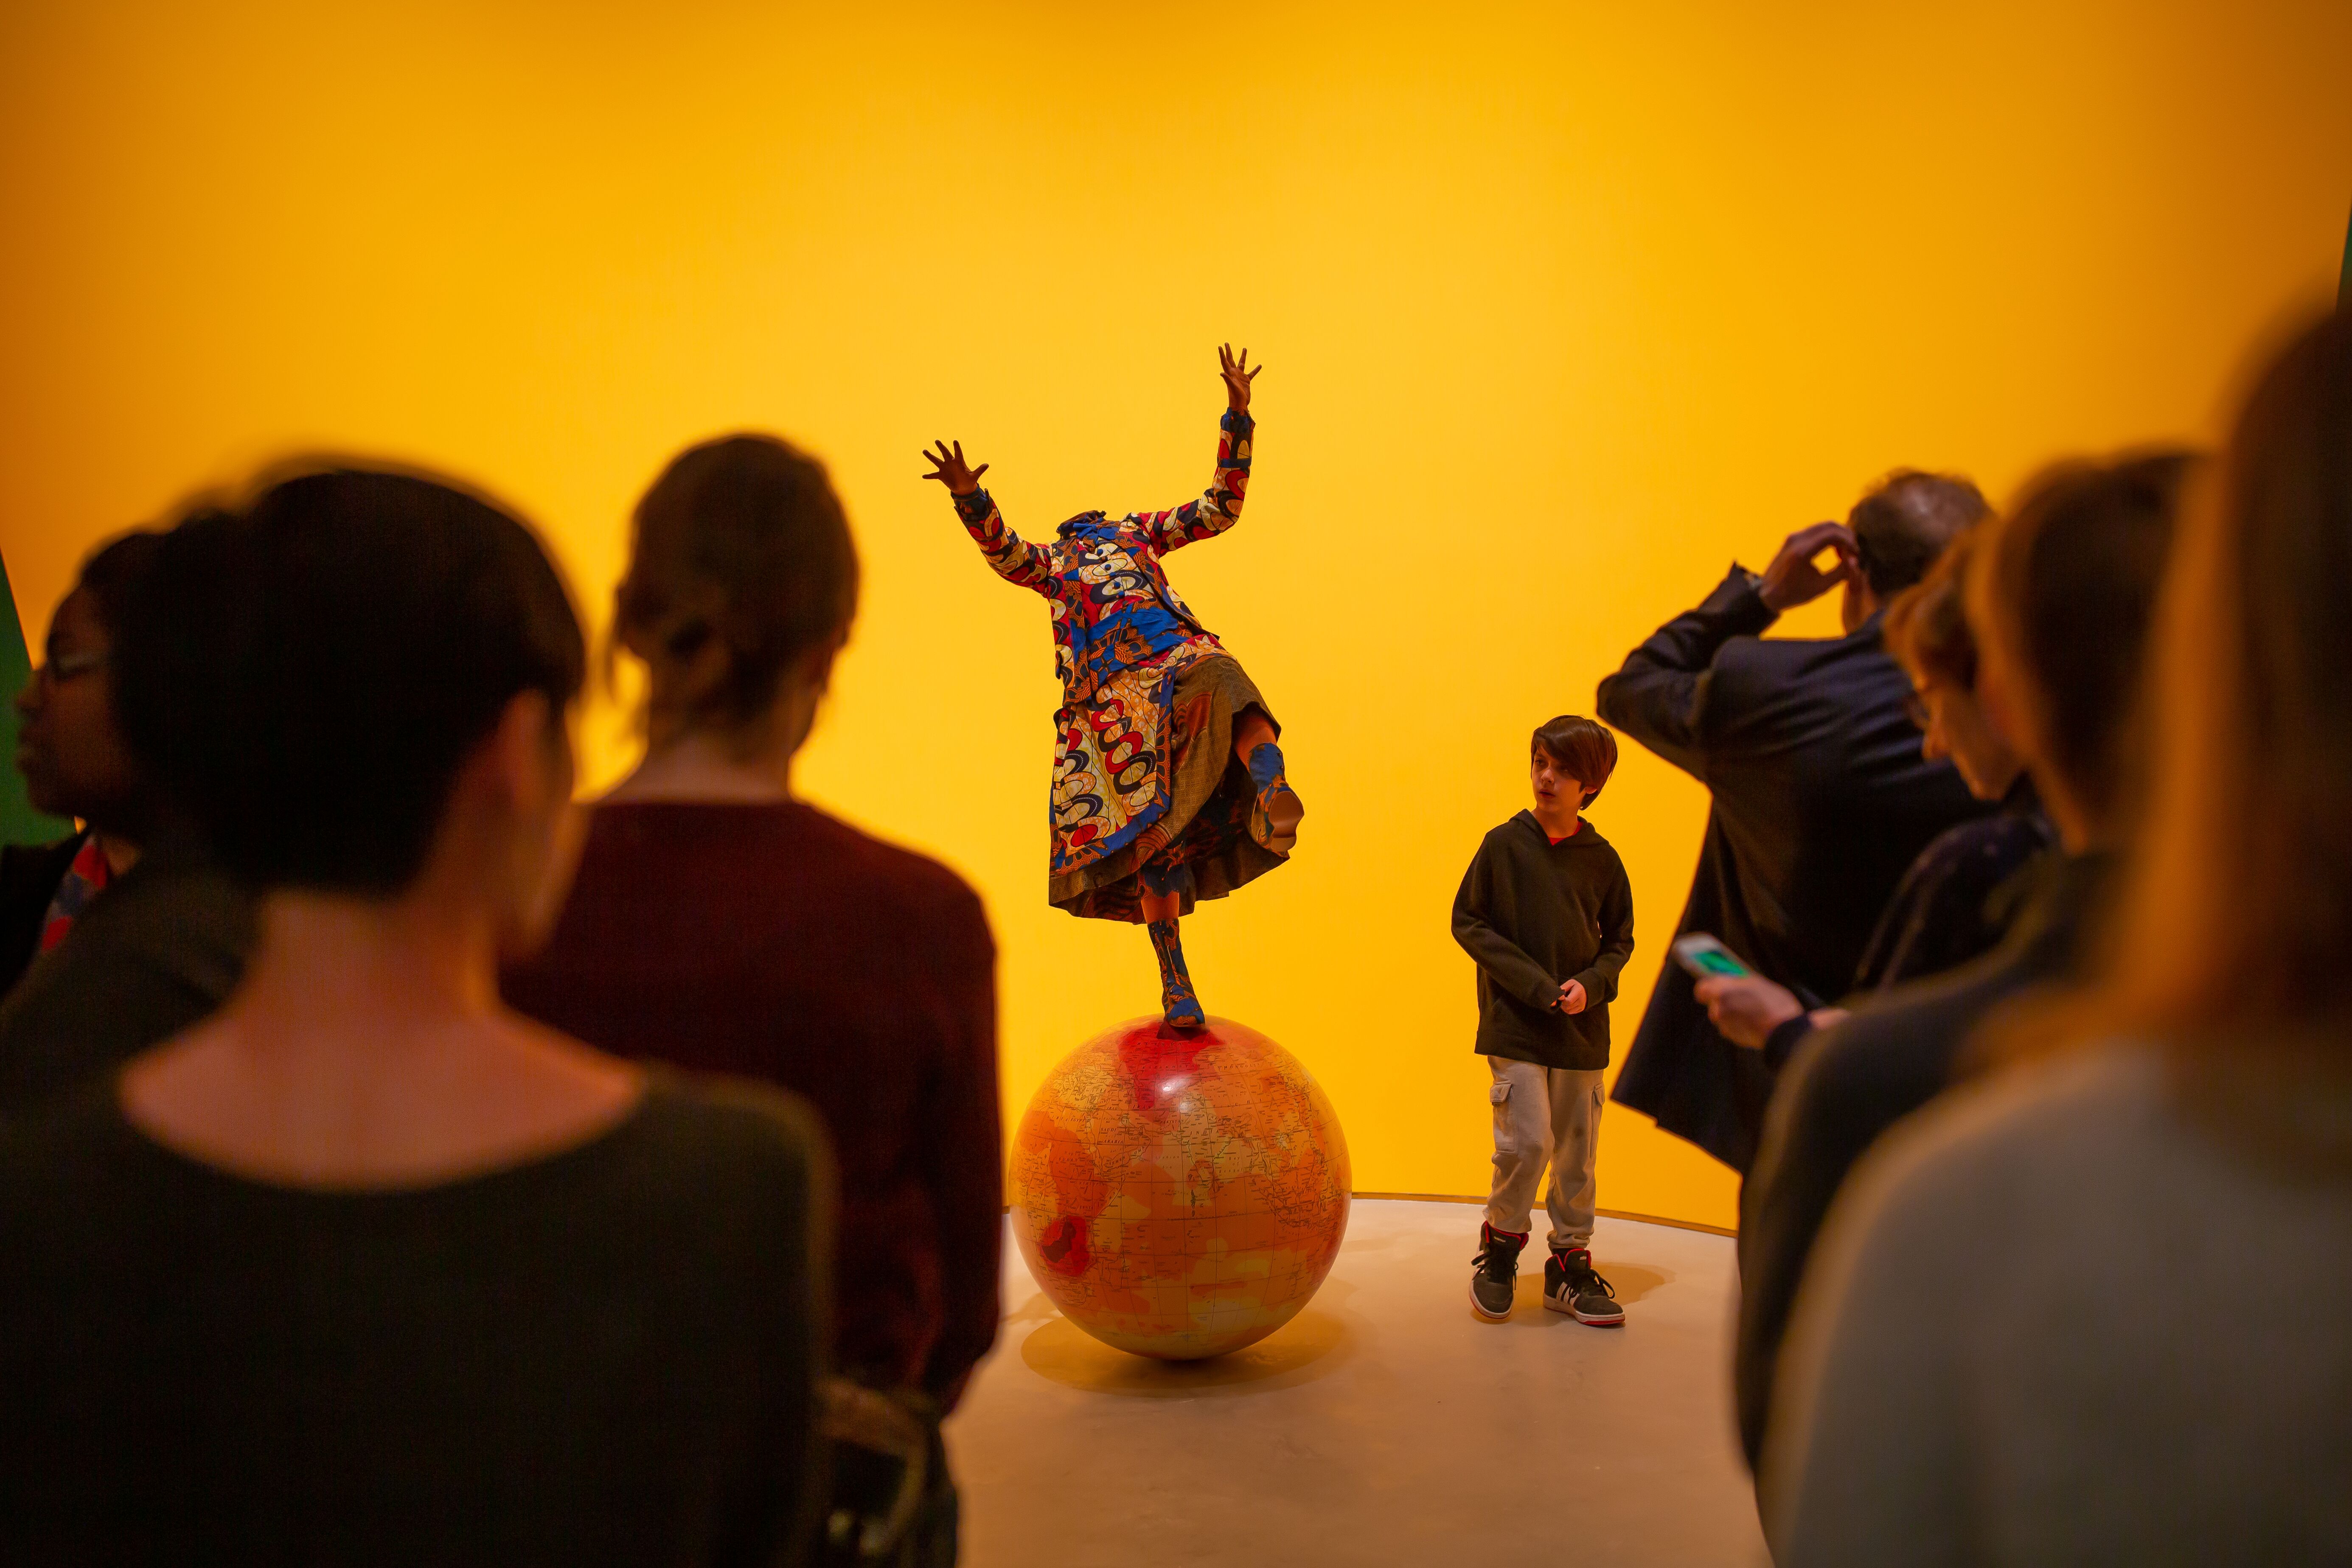 Installation View: "Radical Revisionists", 2020. Photo by Nash Baker, courtesy of Moody Center for the Arts